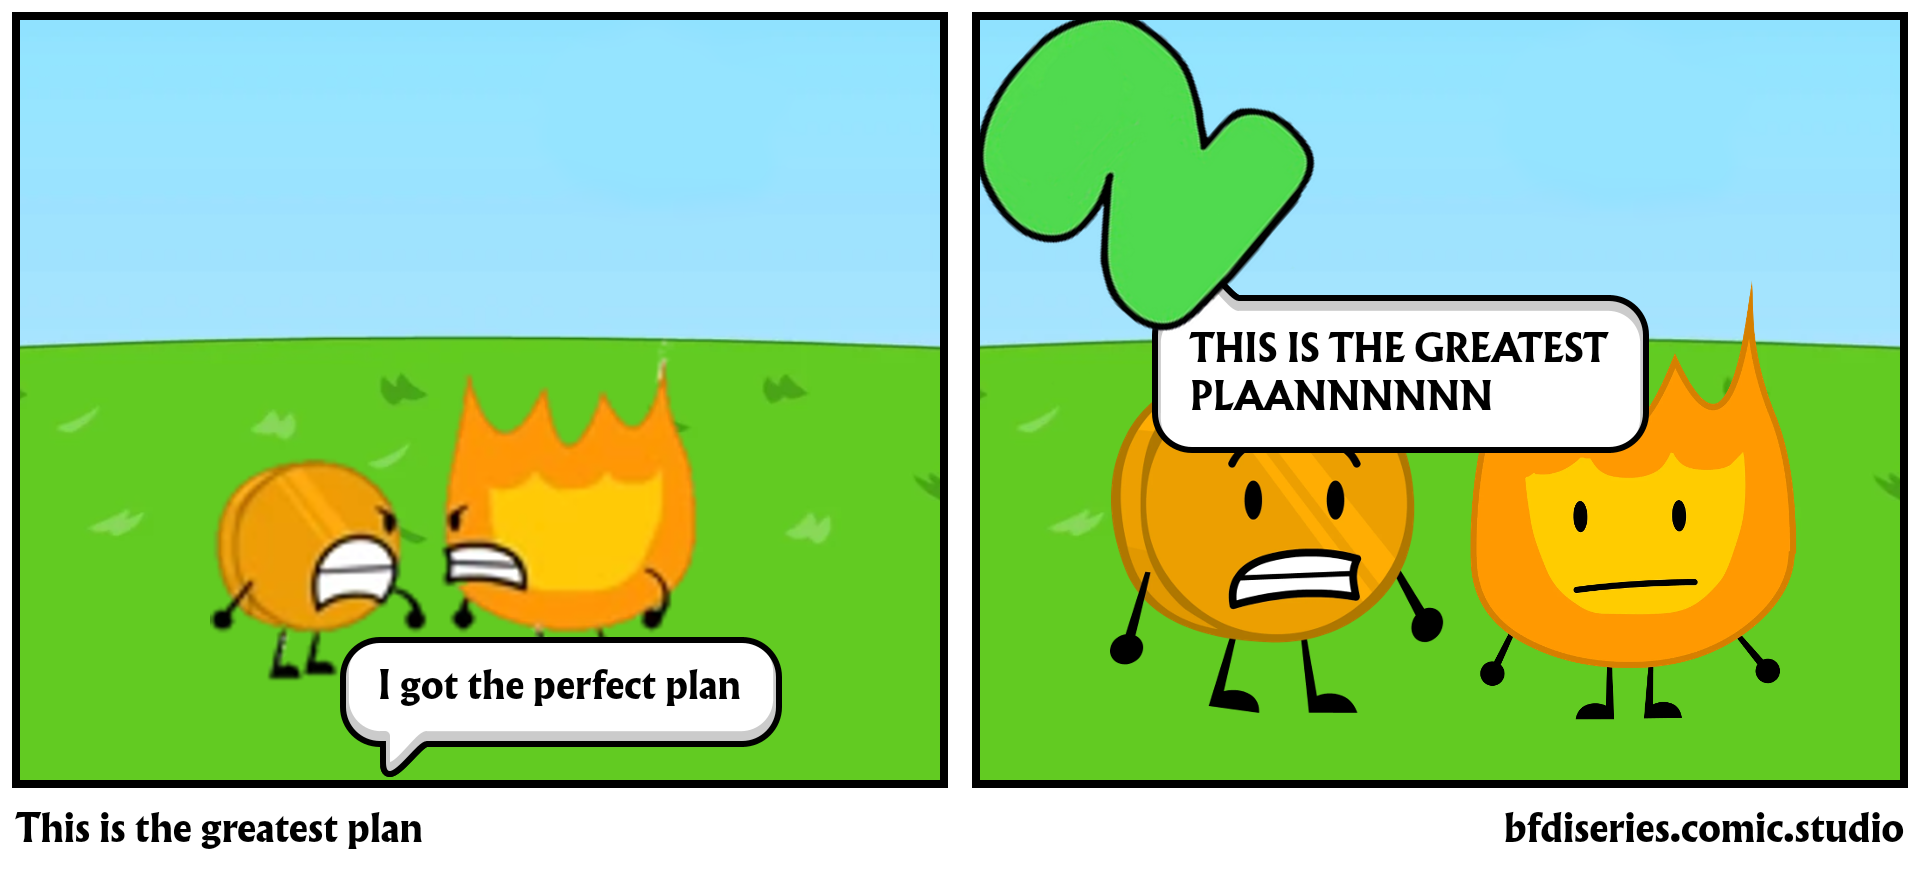 This is the greatest plan